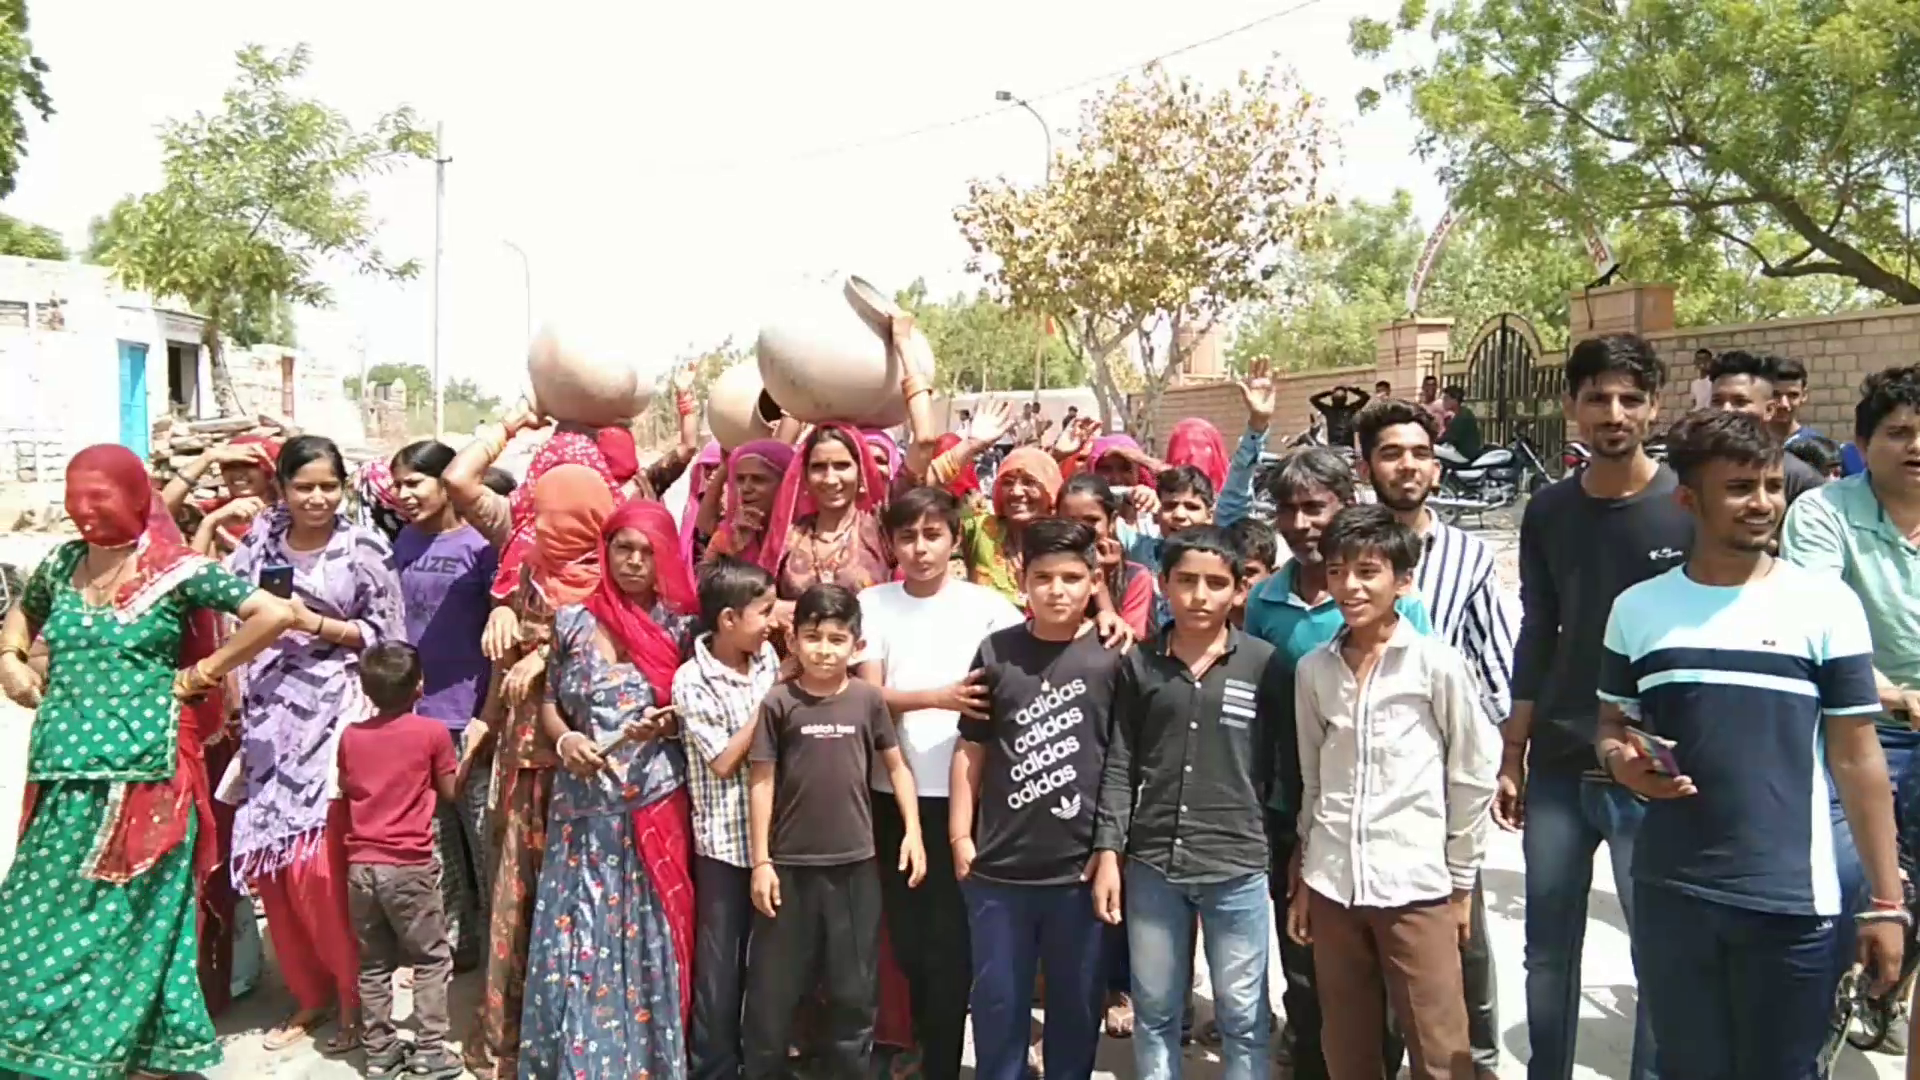 Protest against water crisis in Pali